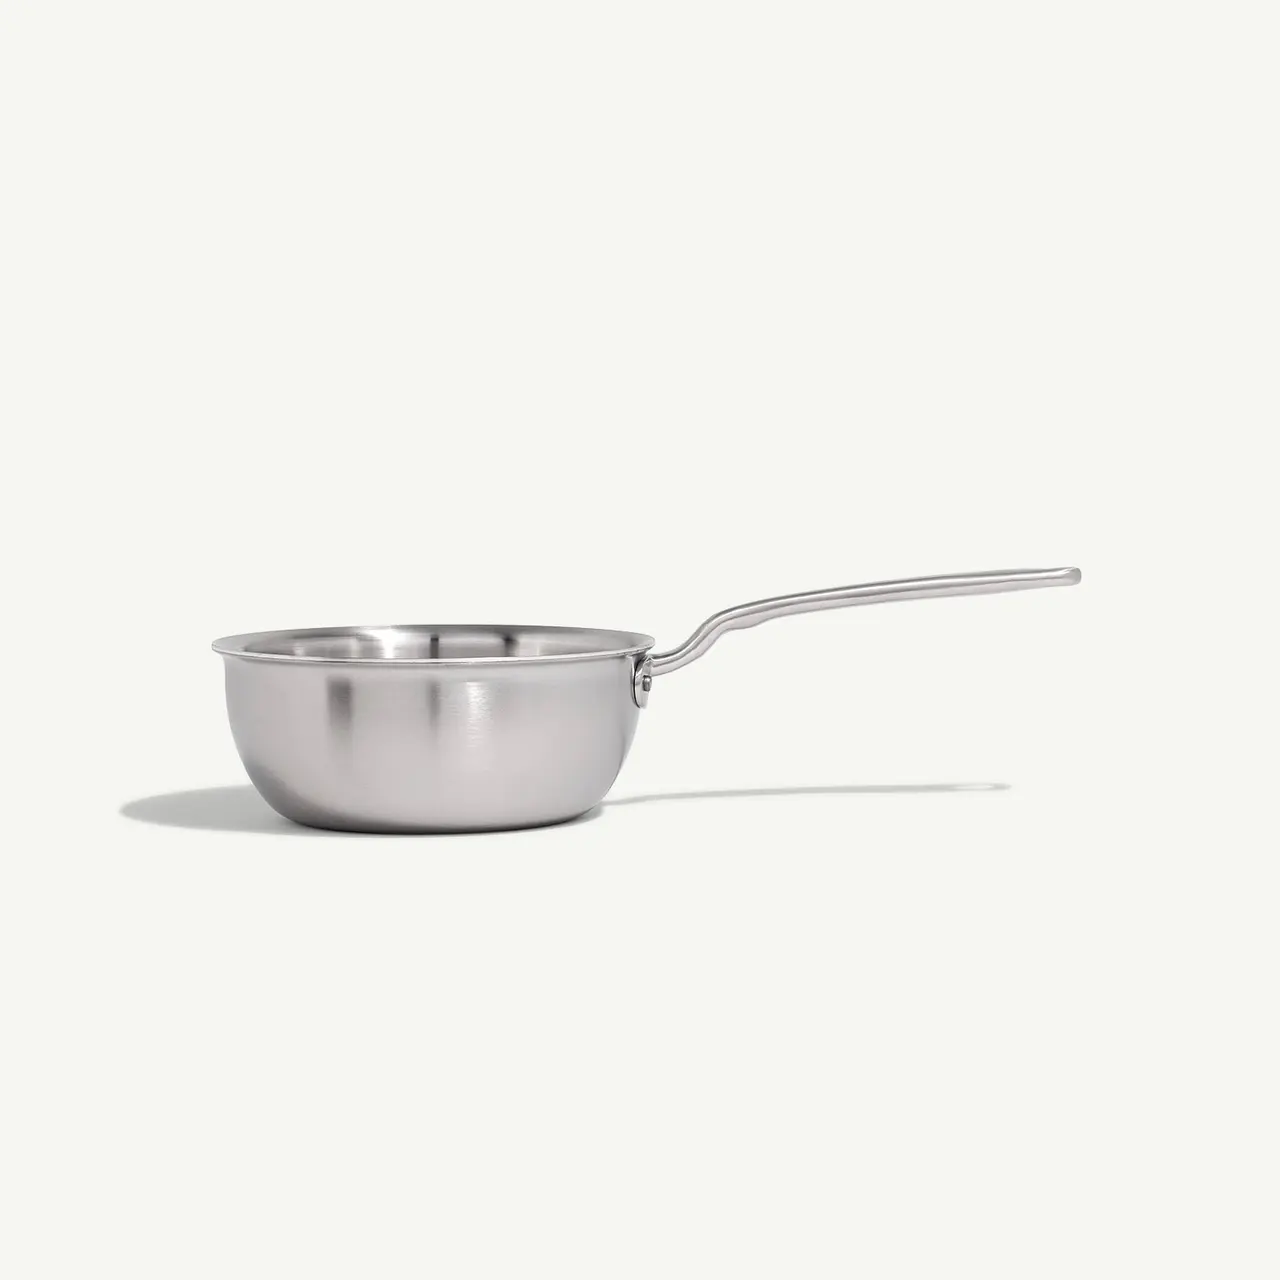 A stainless steel saucepan with a long handle on a plain background.